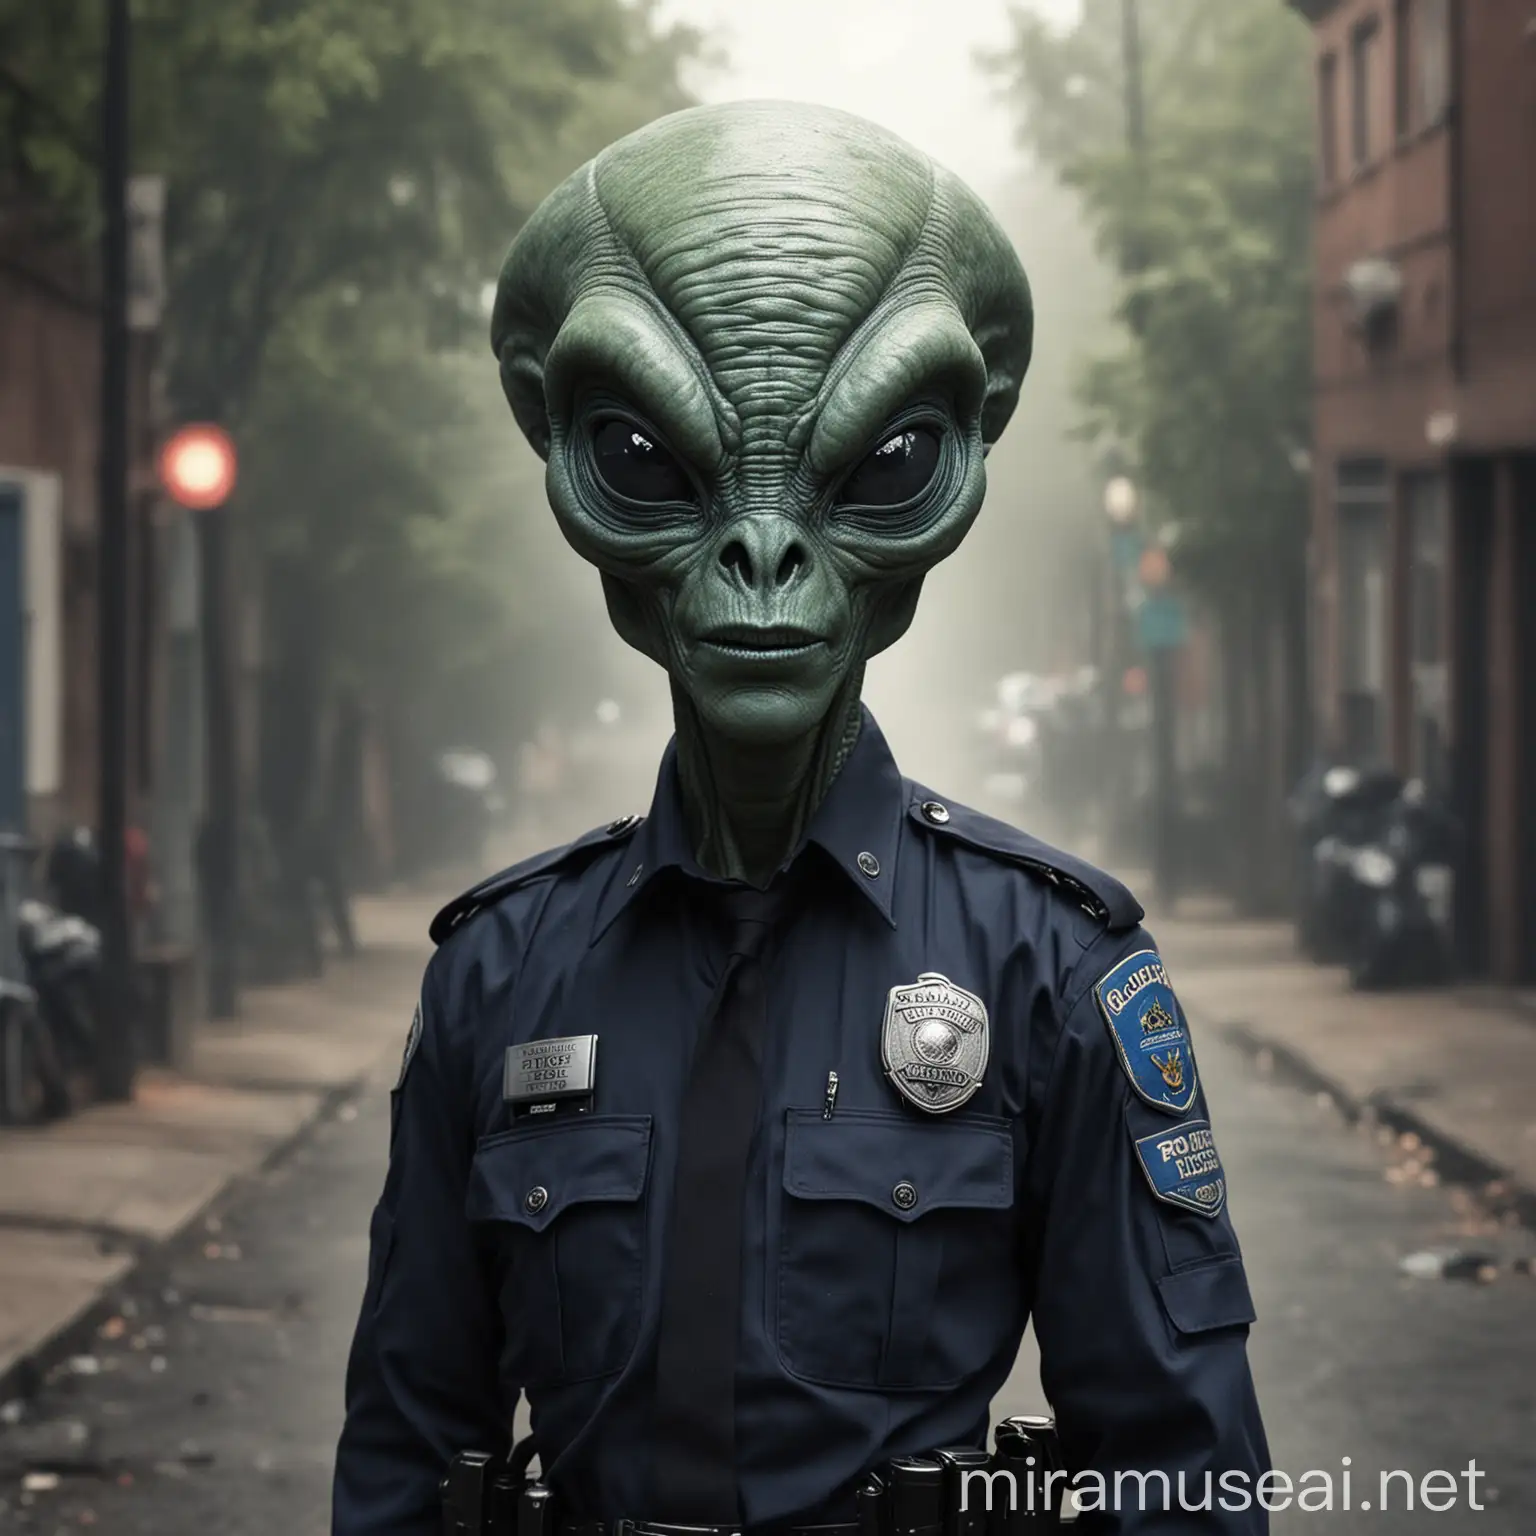 Alien Police Officer Patrolling the Urban Streets